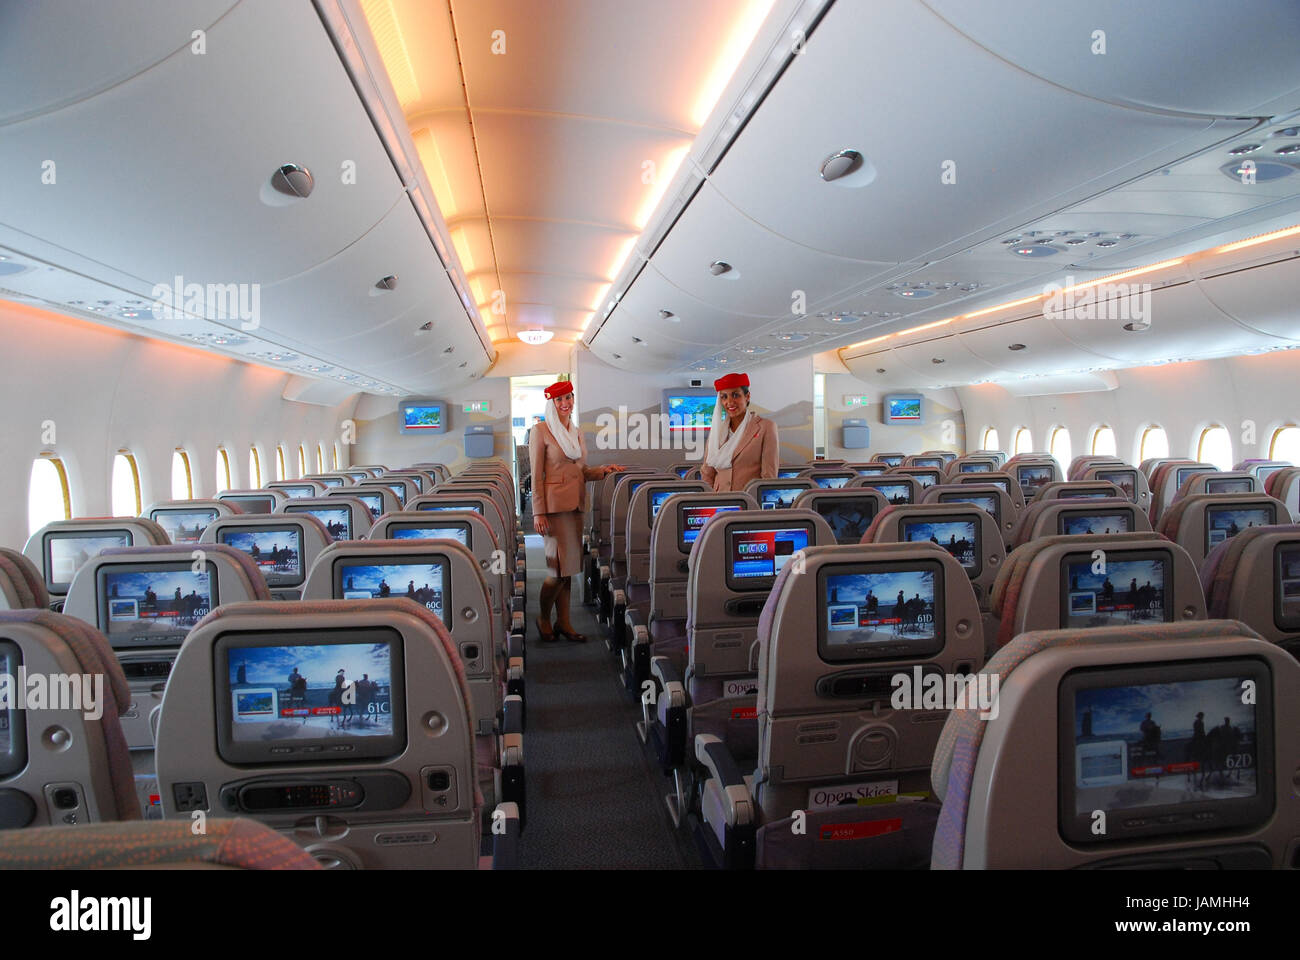 Civil aviation,air liner,airbus A380,cabin,rows,flight attendants, Stock Photo